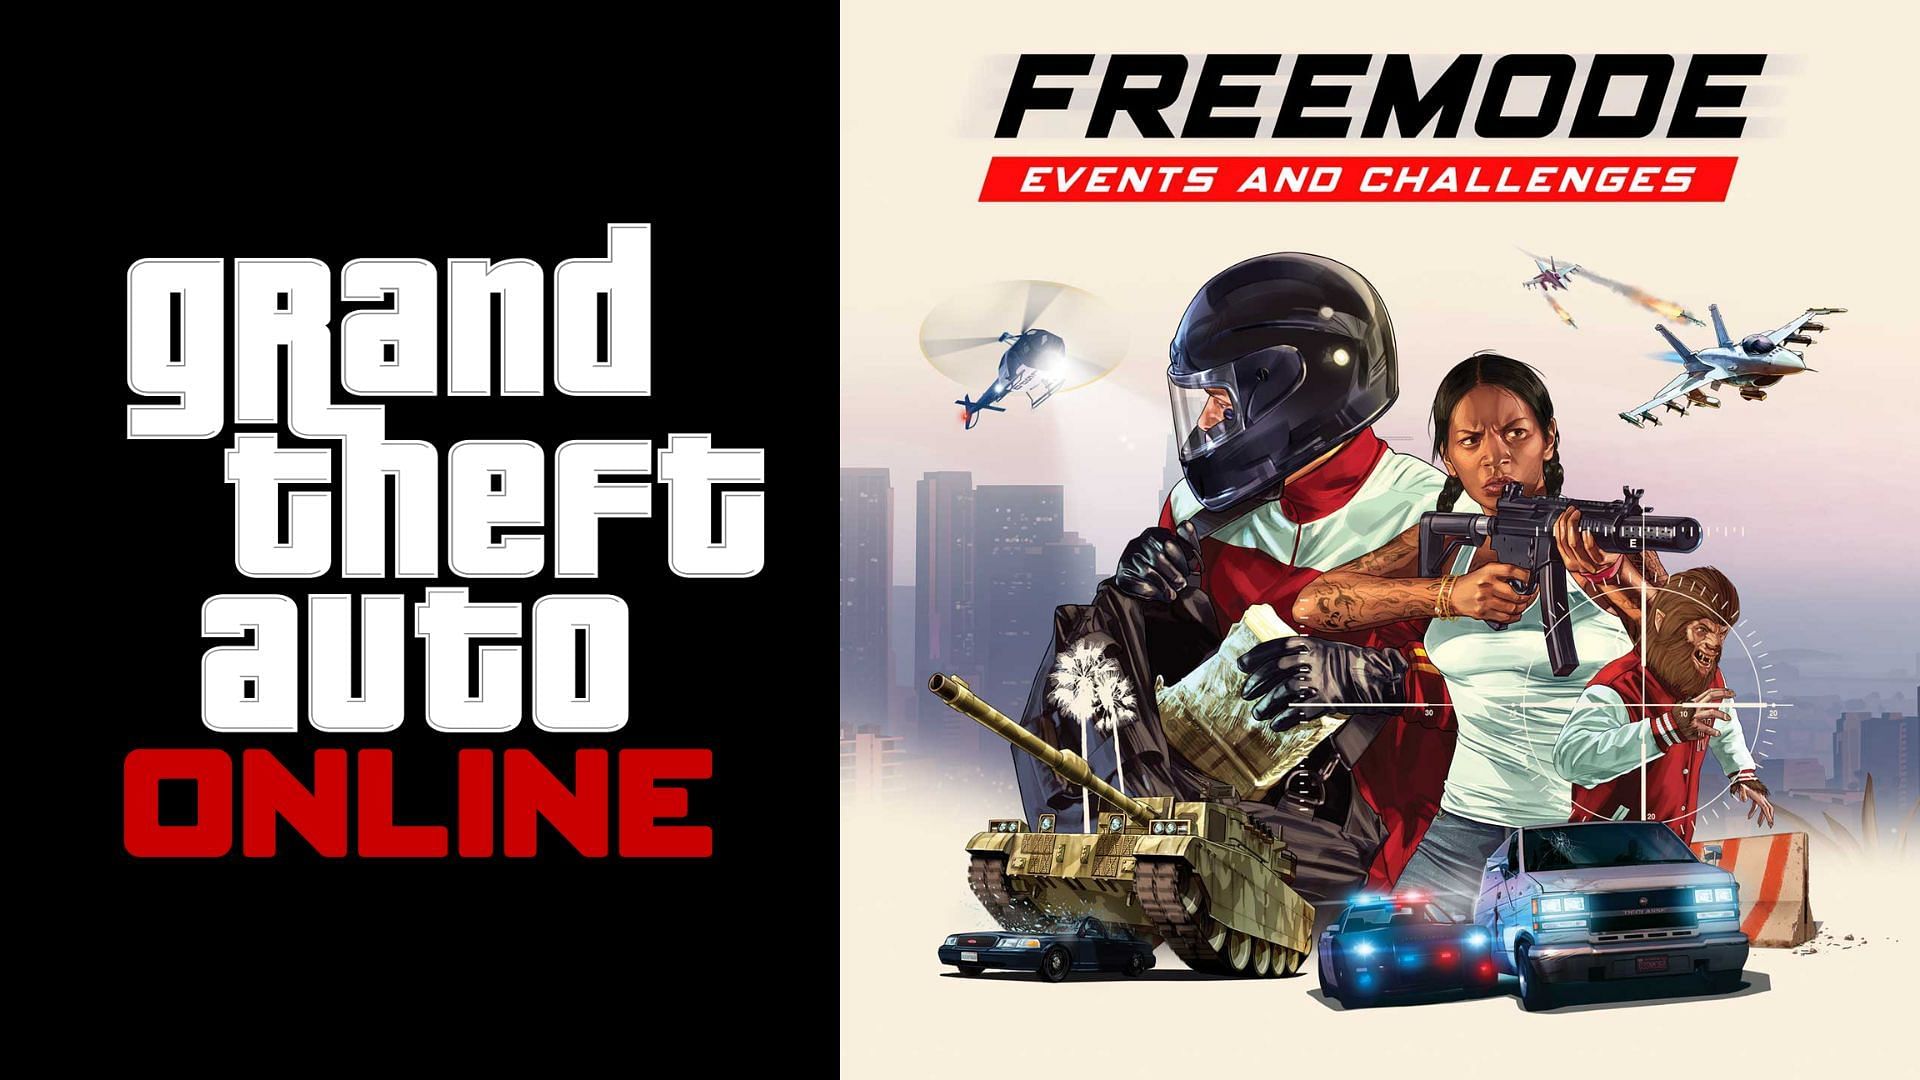 A brief about Freemode Events in GTA Online, and how GTA Online players can play them for double bonuses this week (Image via Rockstar Games)